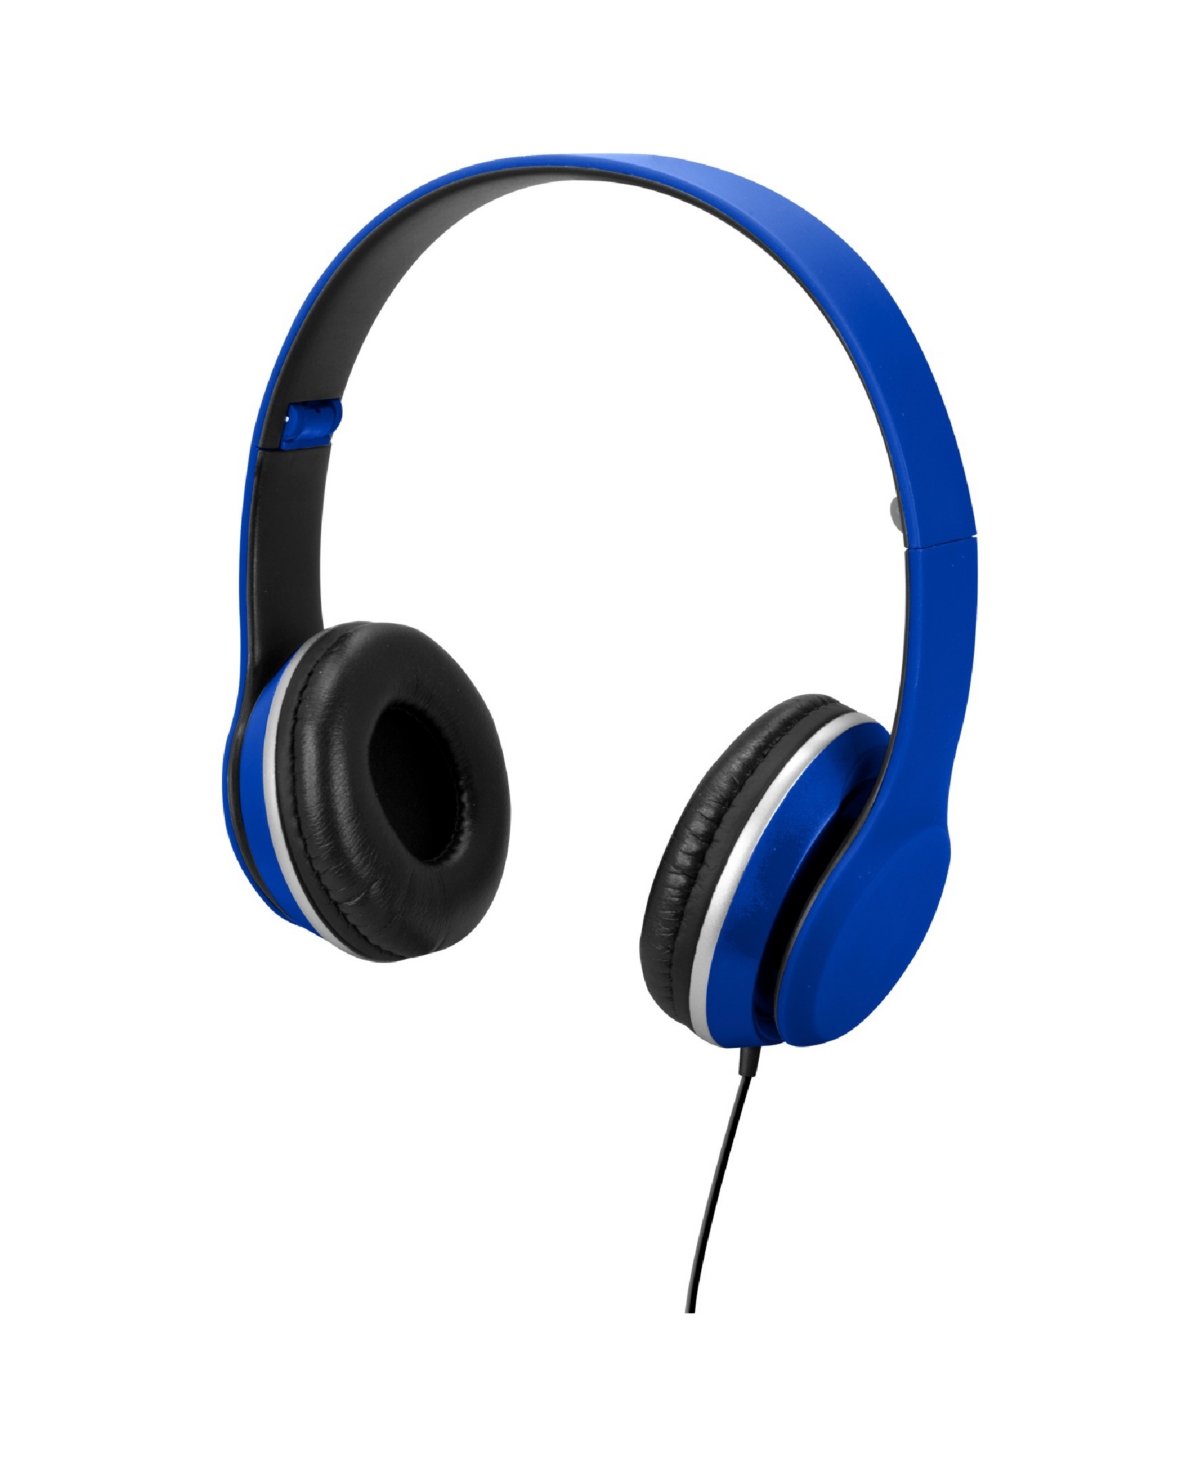 Ilive Foldable Wired Headphones, Iah57bu In Blue